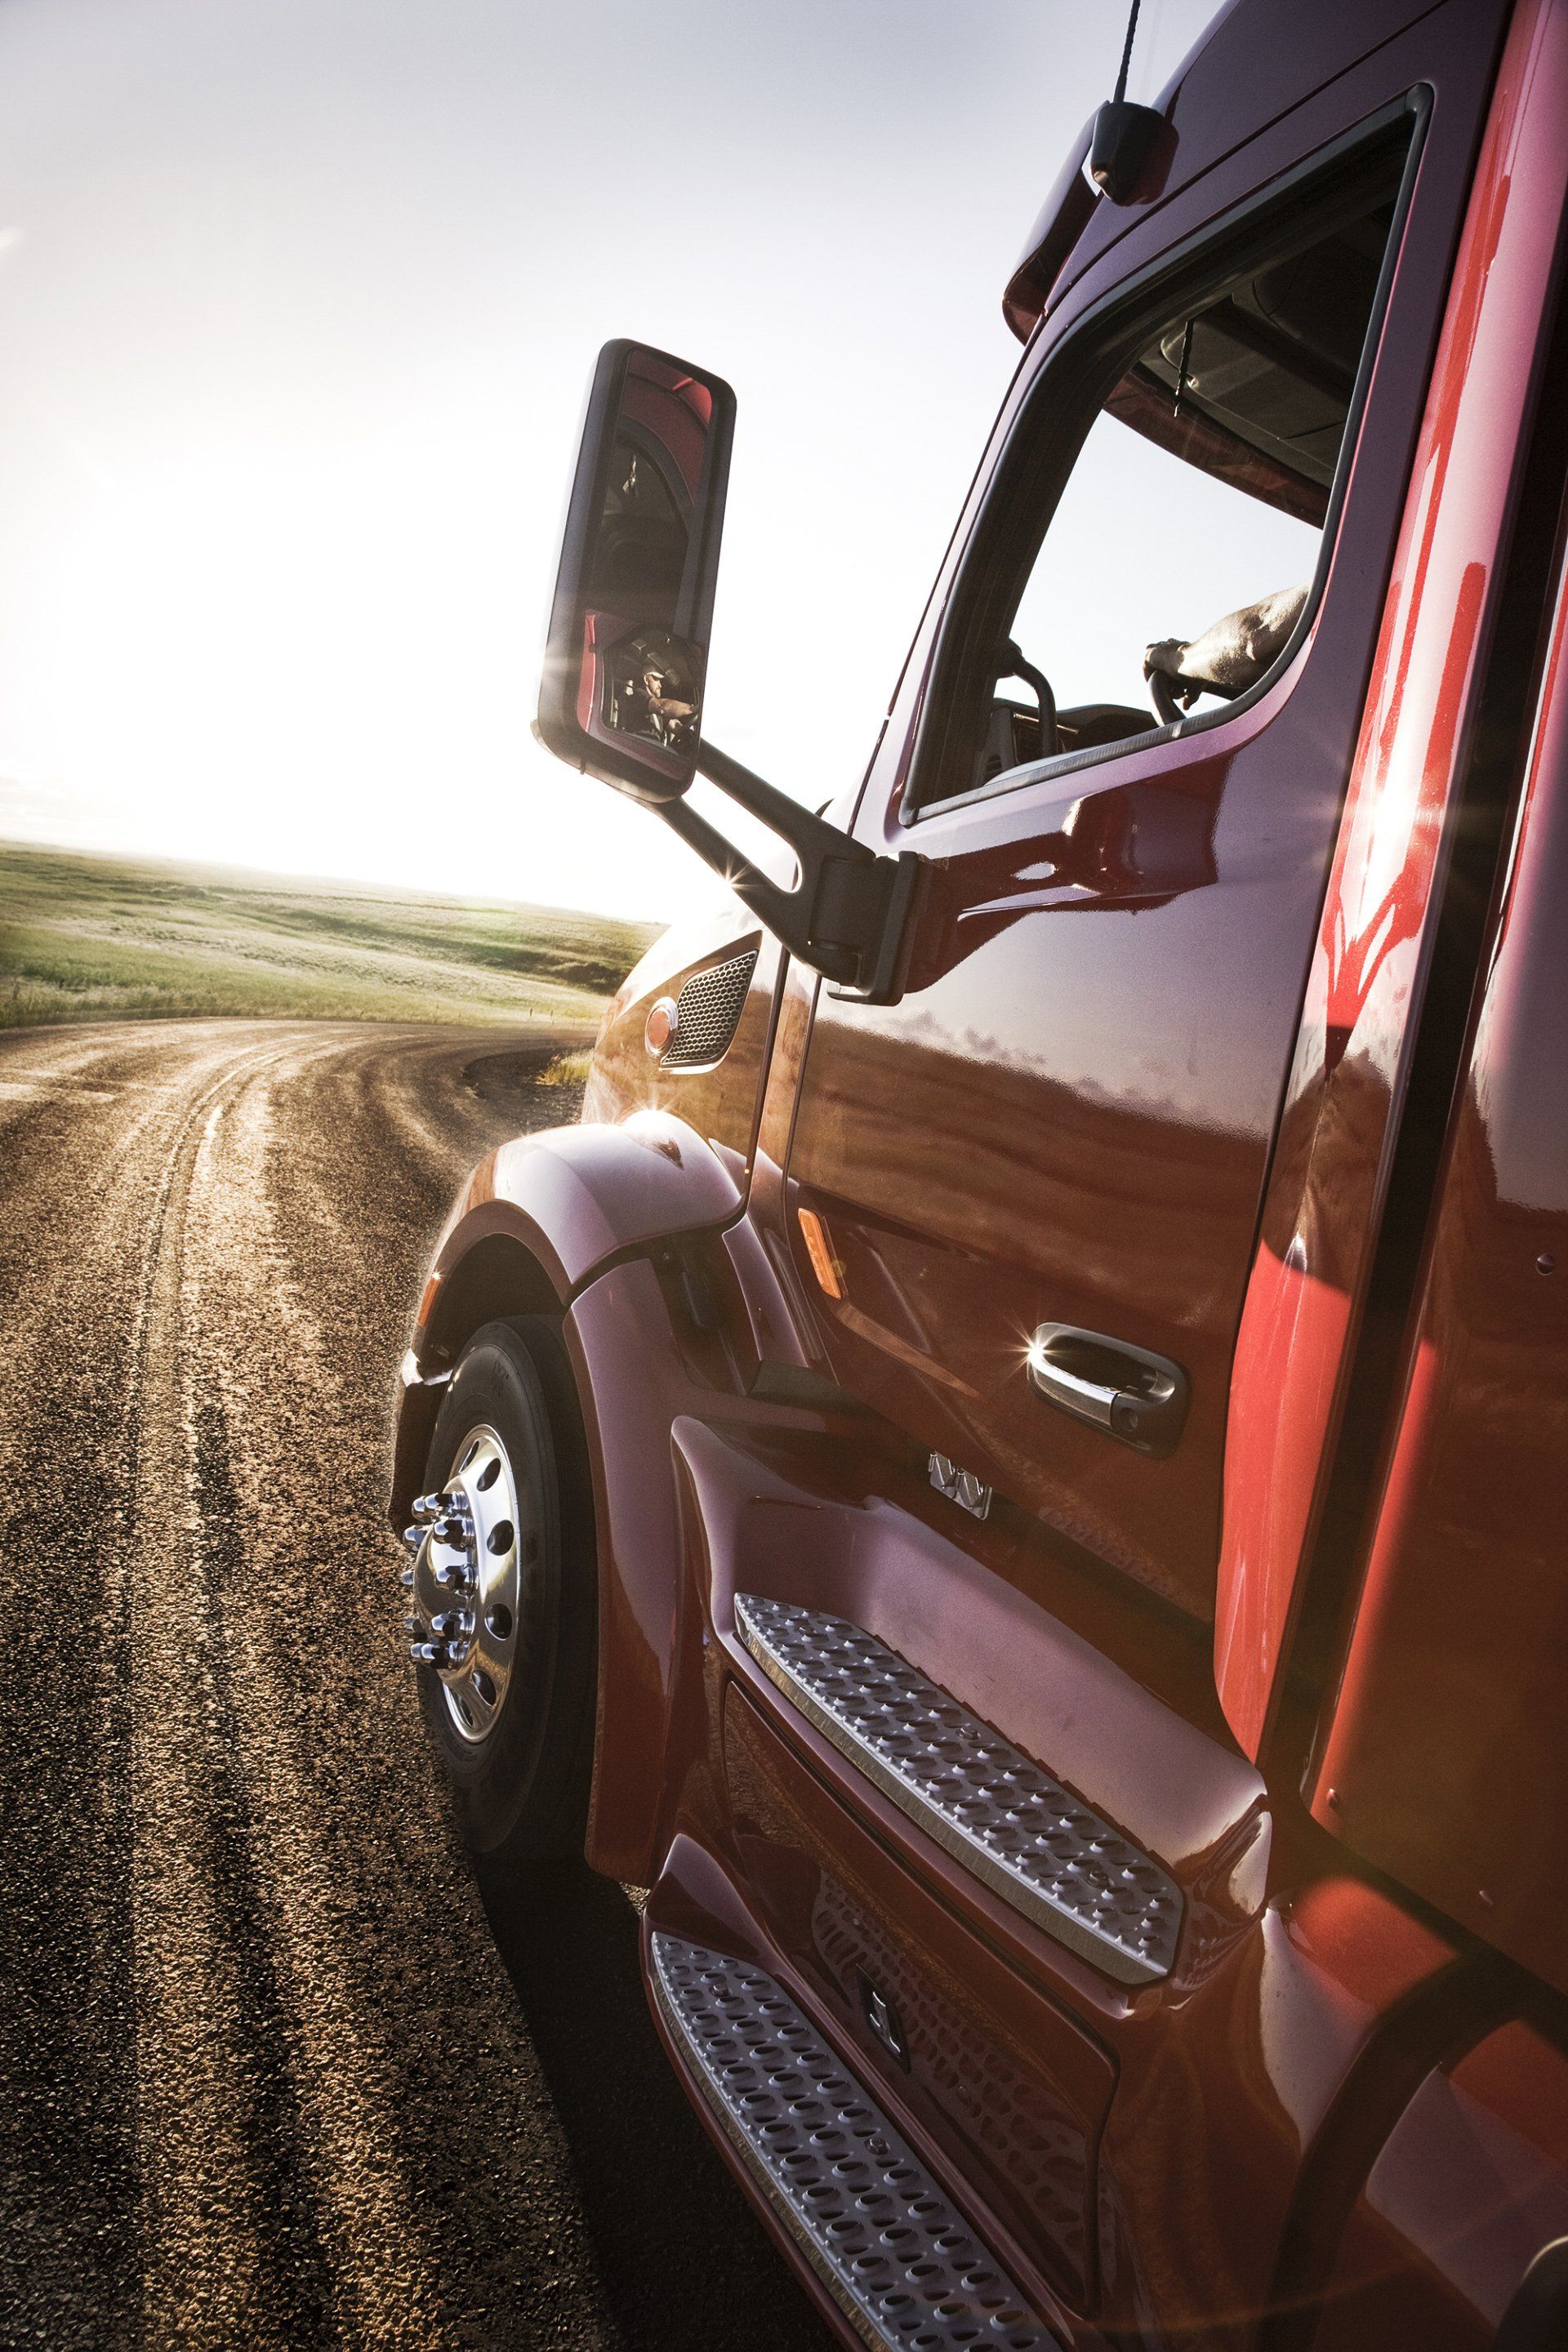 Dealing With a Commercial Driver DWI in Columbia, MO? Call Harper Evans Hilbrenner & Netemeyer